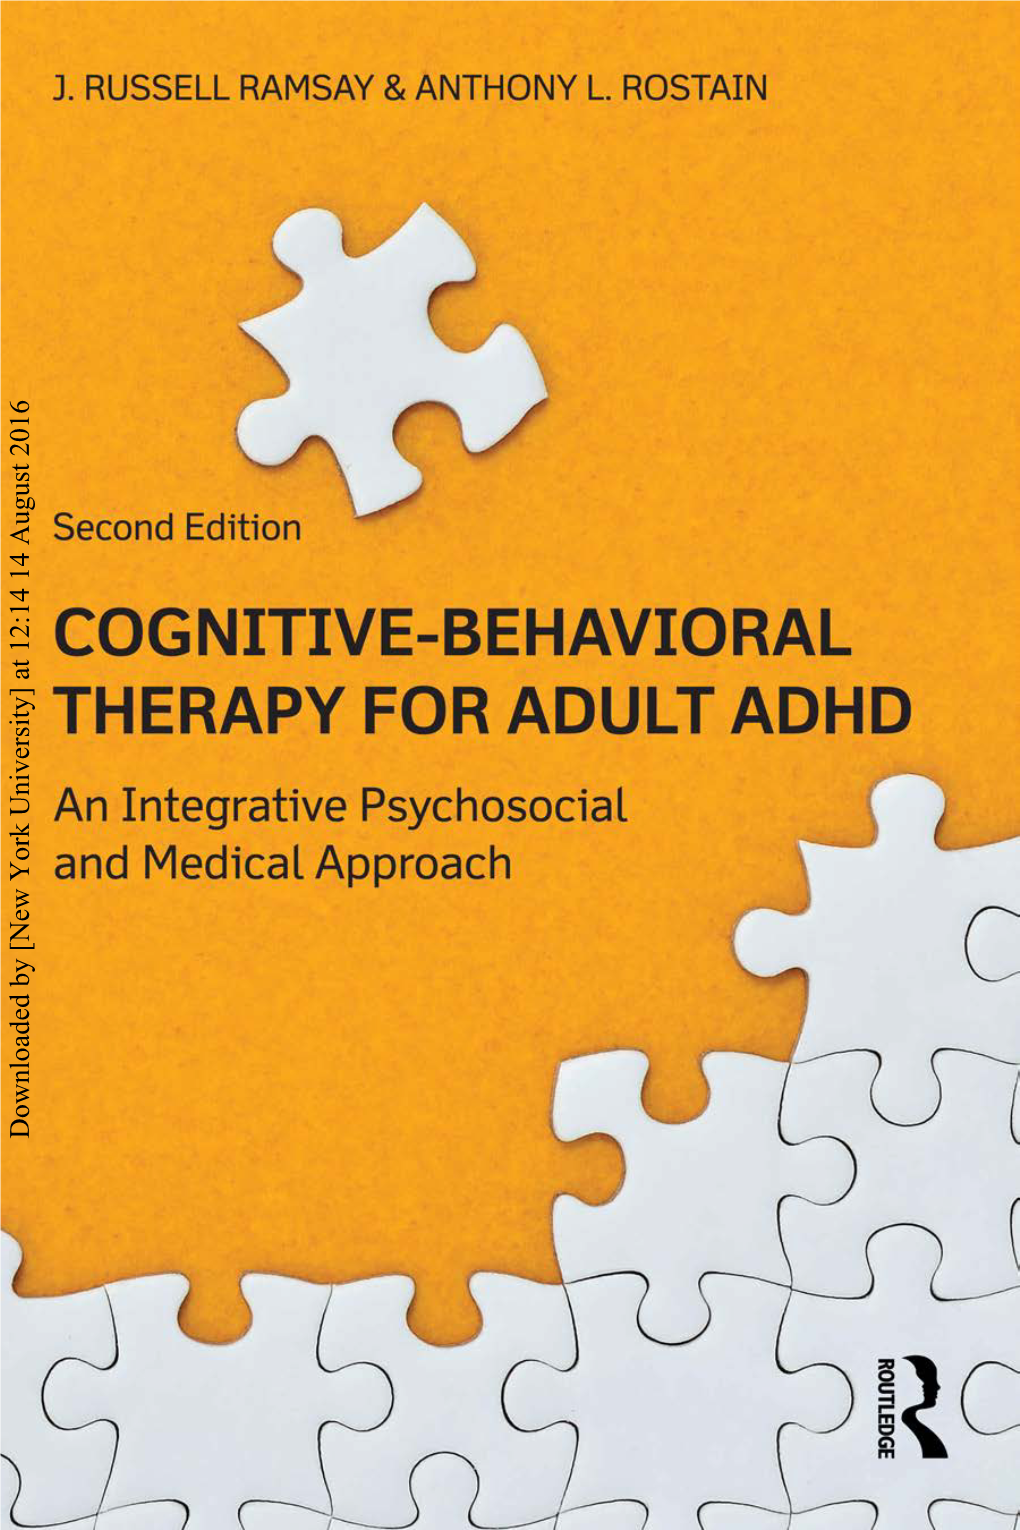 Downloaded by [New York University] at 12:14 14 August 2016 Cognitive-Behavioral Therapy for Adult ADHD